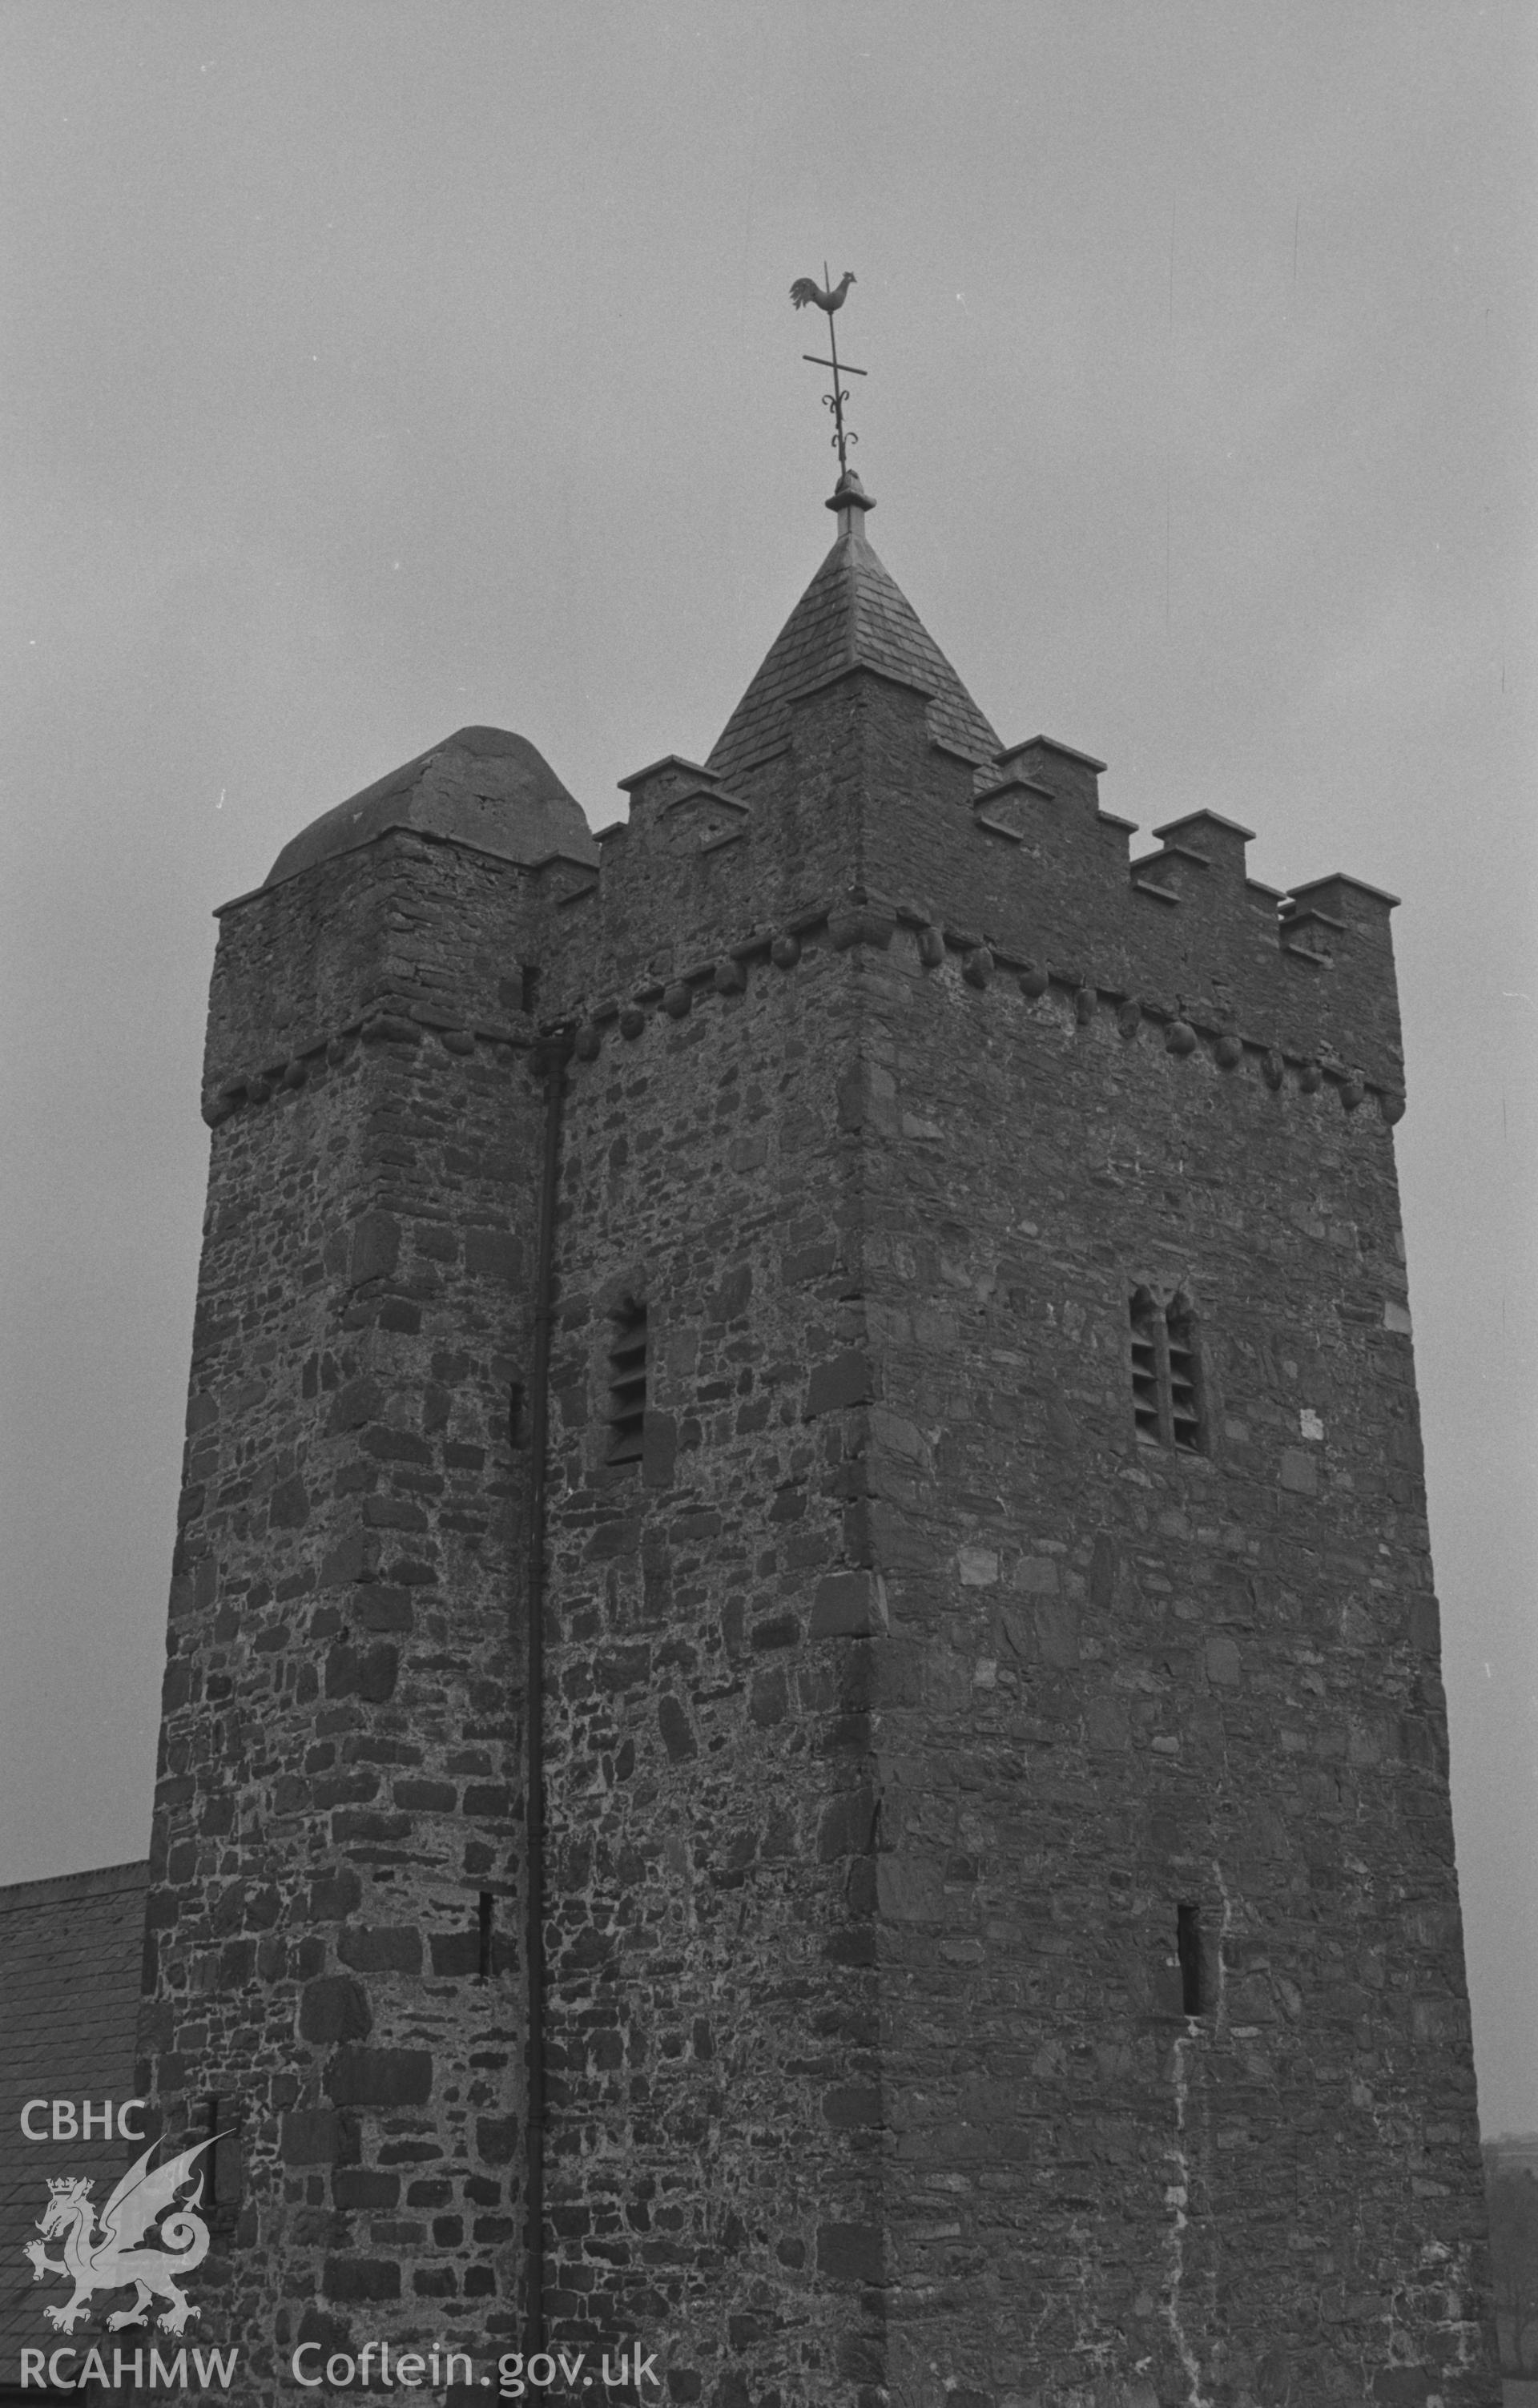 Digital copy of a black and white negative showing St. David's church tower and weathercock, Llanarth. Photographed by Arthur O. Chater on 13th April 1967 looking south west from Grid Reference SN 423 578.